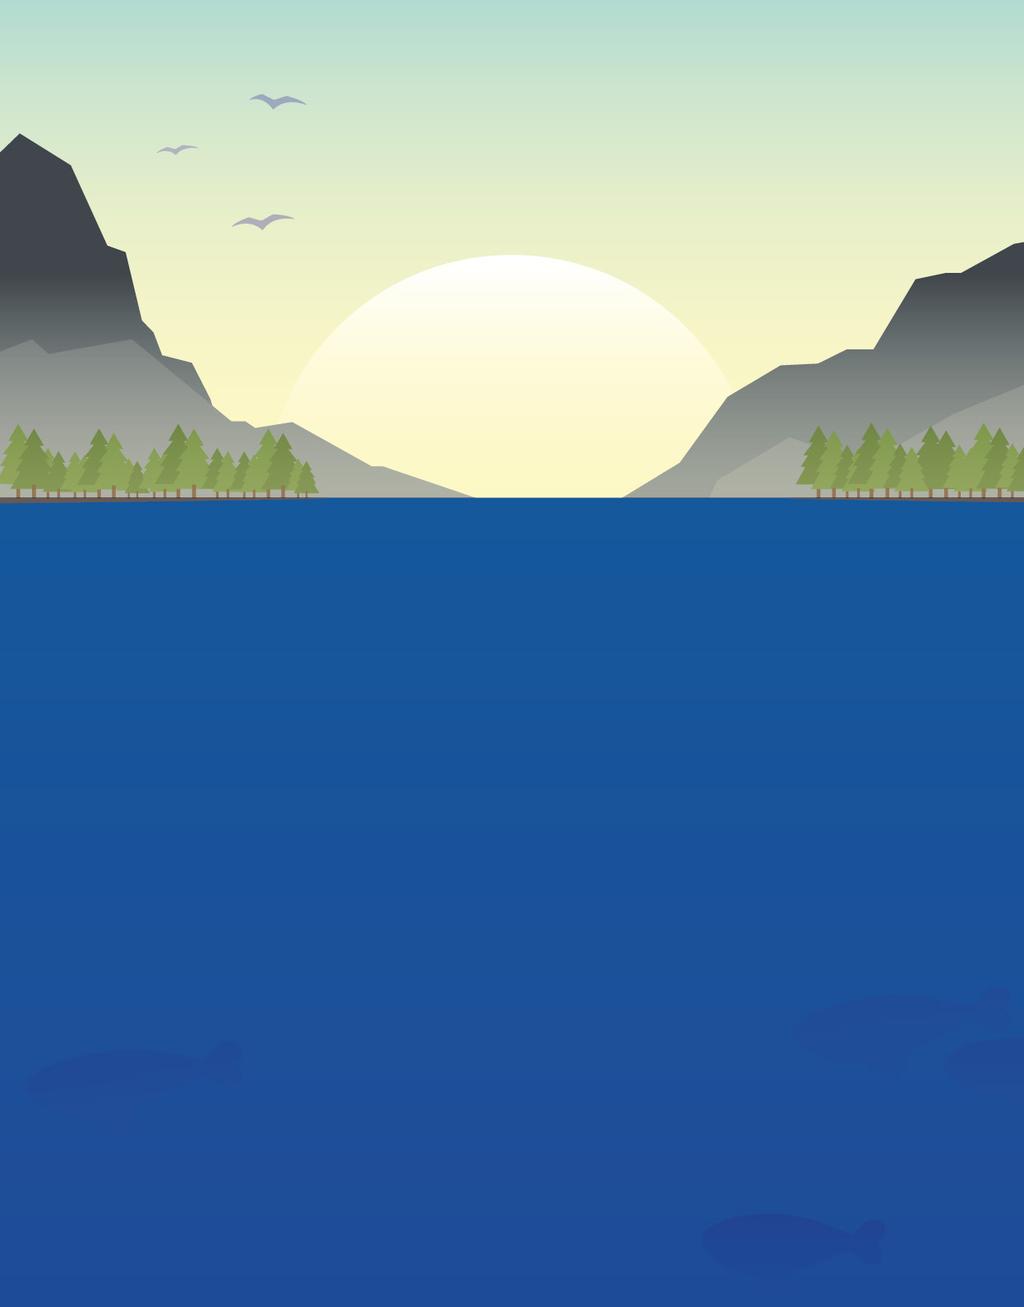 C-CASCADES FACTSHEET THE IMPORTANCE OF THE LAND-OCEAN AQUATIC CONTINUUM CARBON CYCLE FOR CLIMATE PROJECTIONS Objectives of C-CASCADES THE MOST RECENT INTERGOVERNMENTAL PANEL ON CLIMATE CHANGE